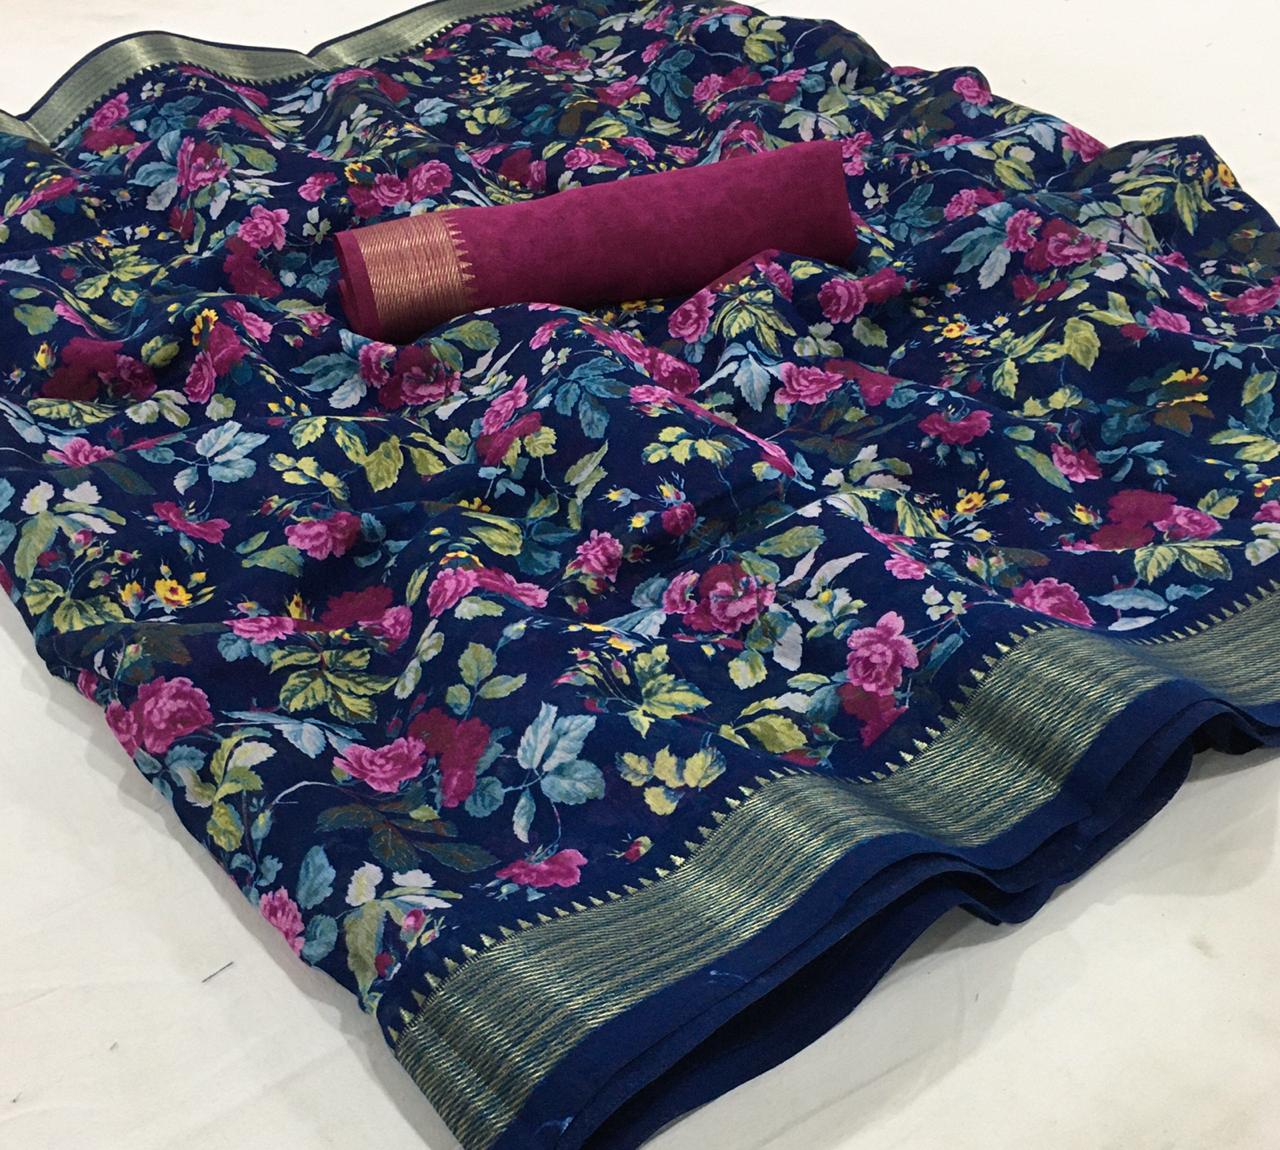 Lt Fabrics Nandini Floral Printed Soft Cotton Linen With Zar...